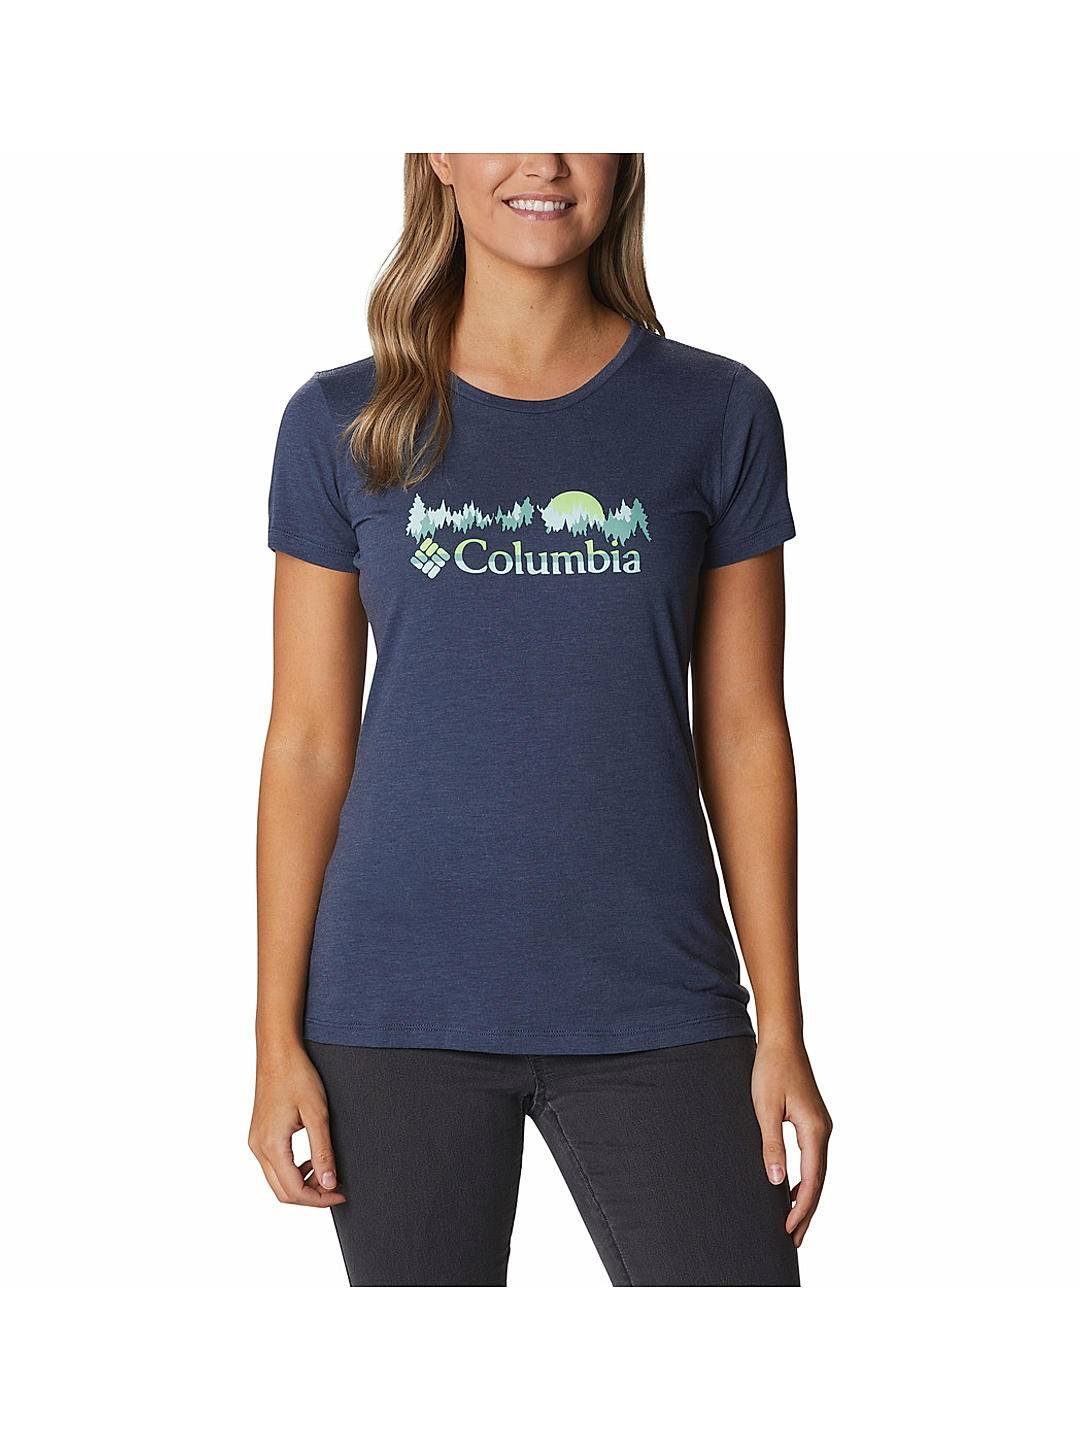 Buy Blue Daisy Women Online Ss Sportswear Days Columbia for 480451 at Tee | Graphic